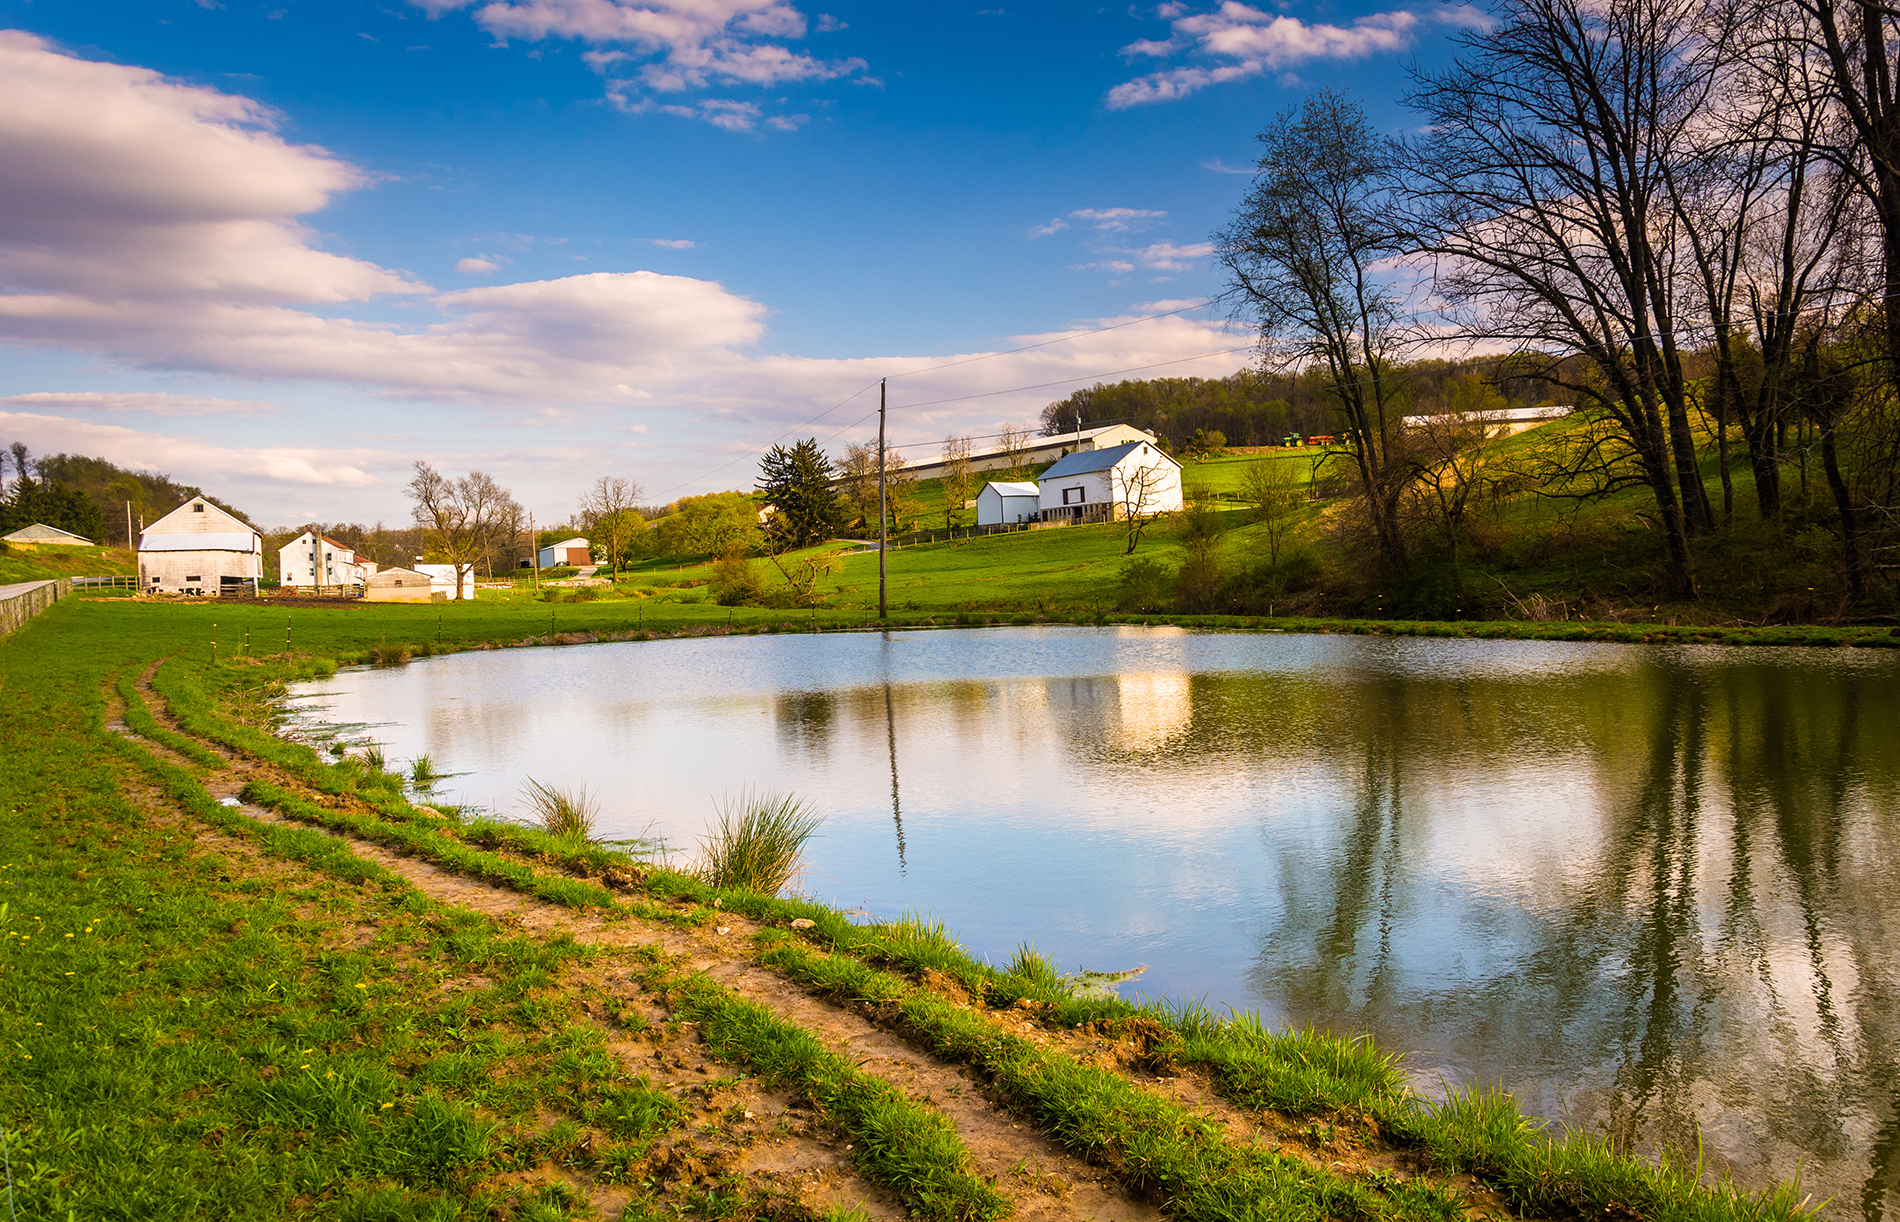 Pond on a farm in the Northeast Marcellus Shale Region.